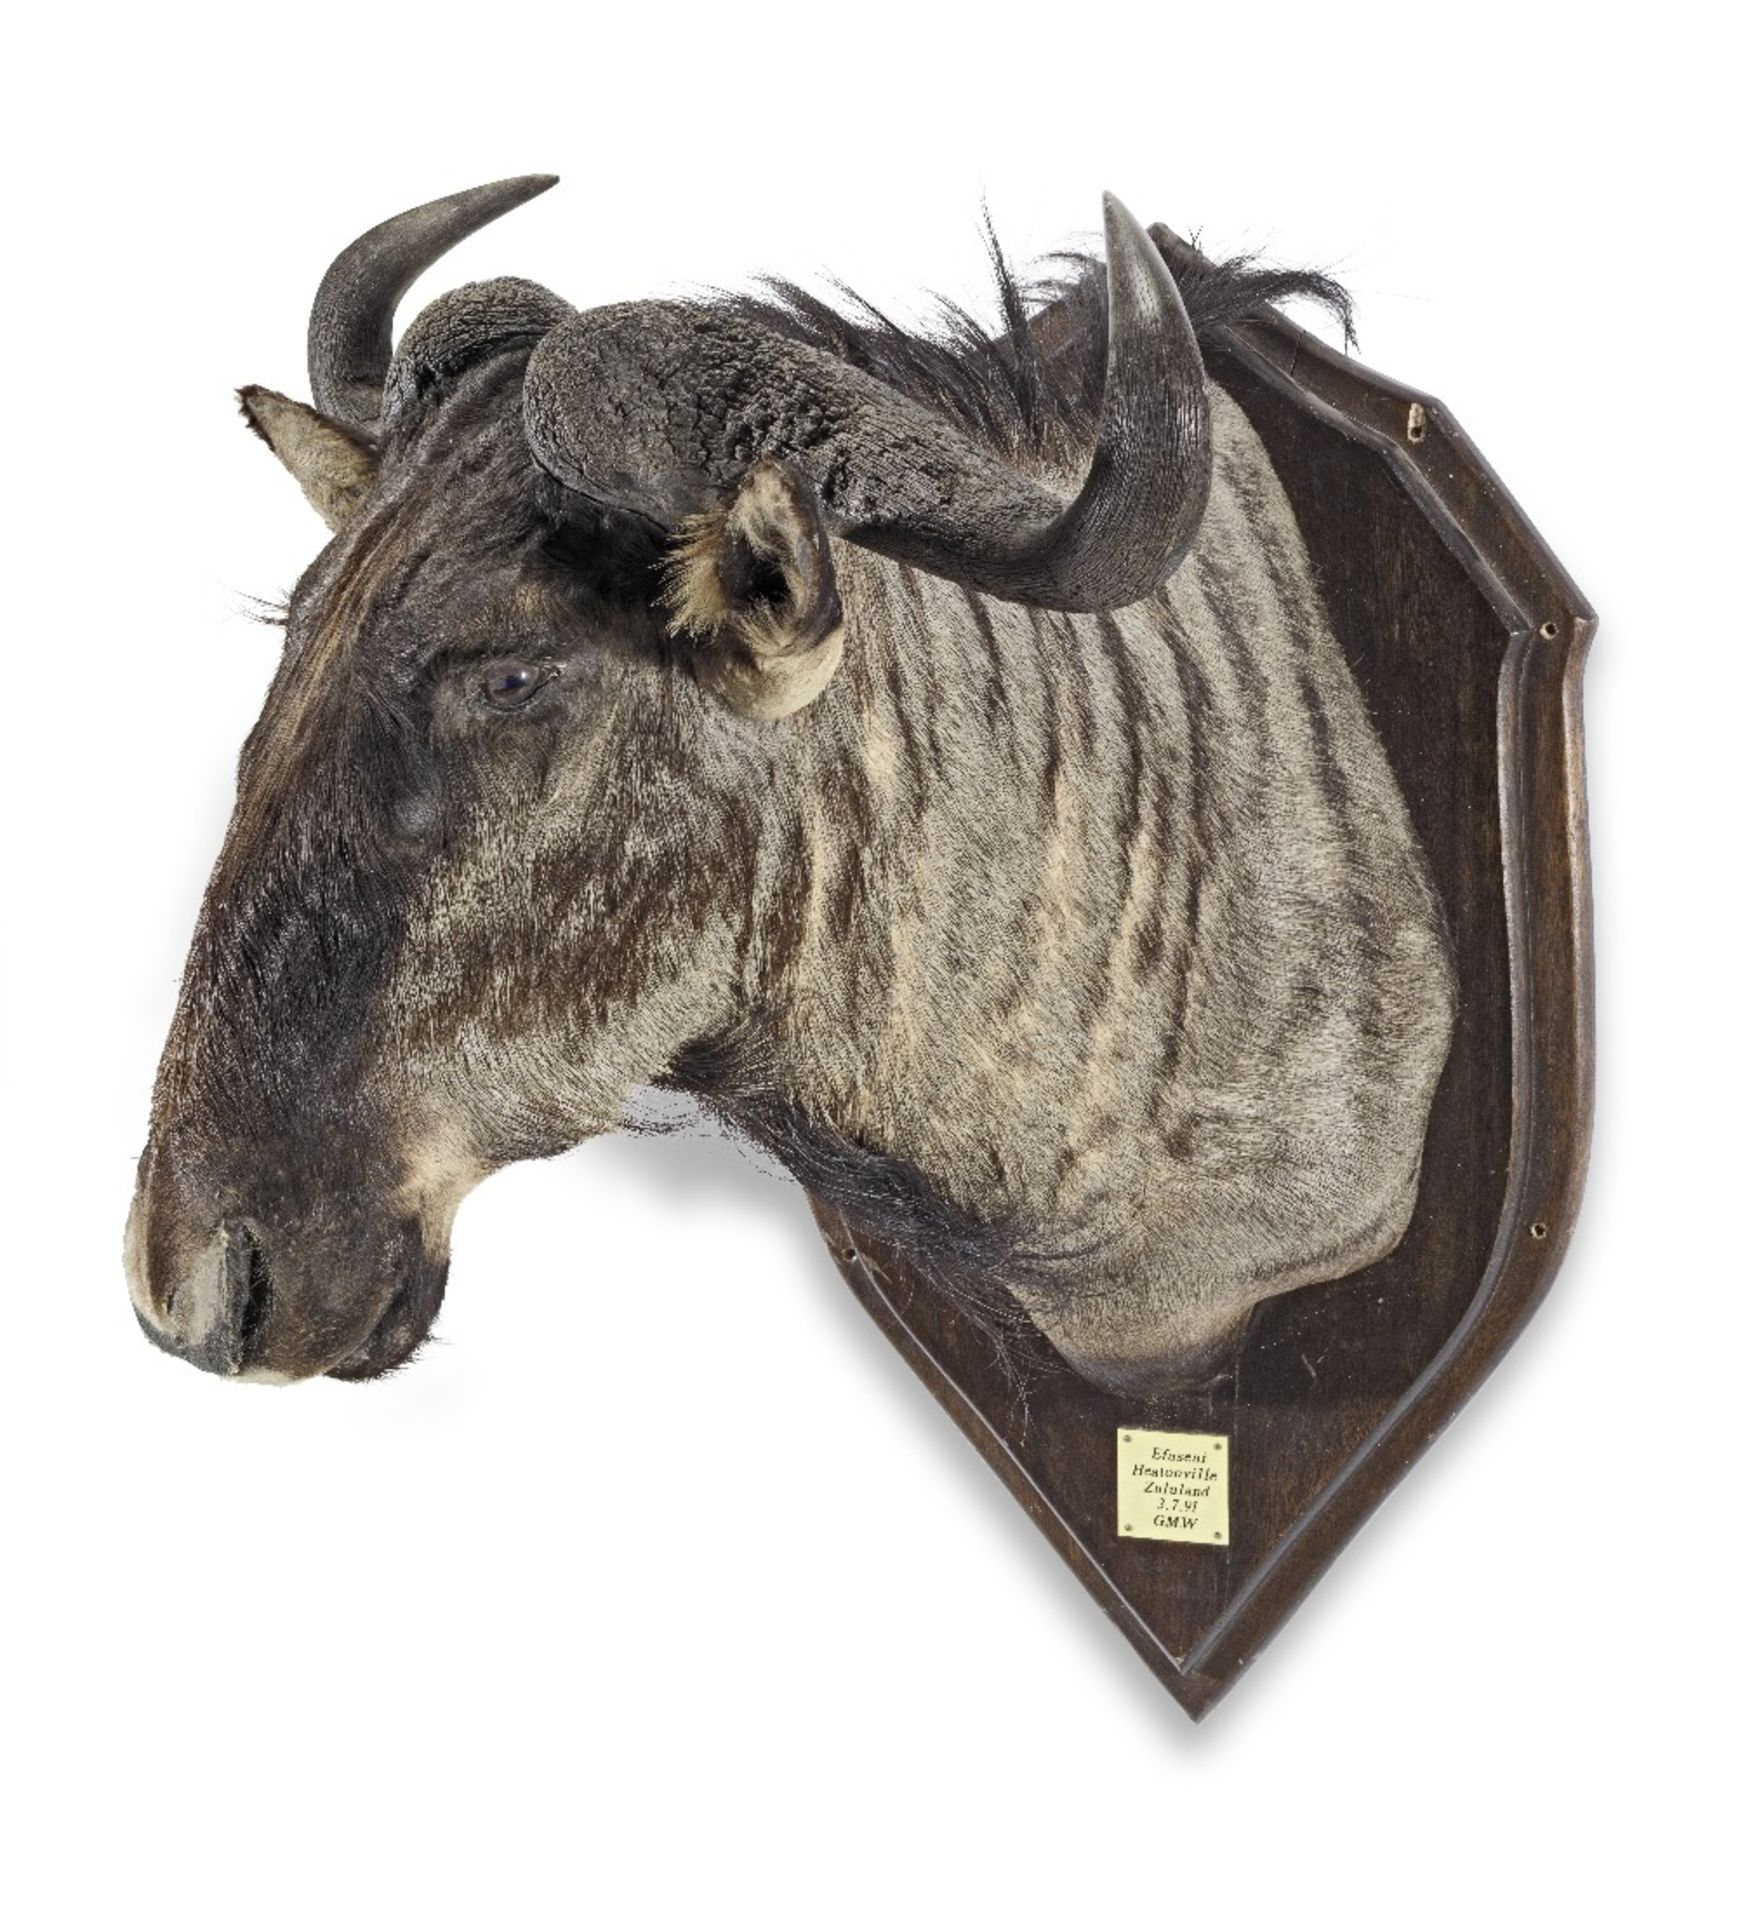 A stuffed and mounted taxidermy Wildebeest head hunting trophy